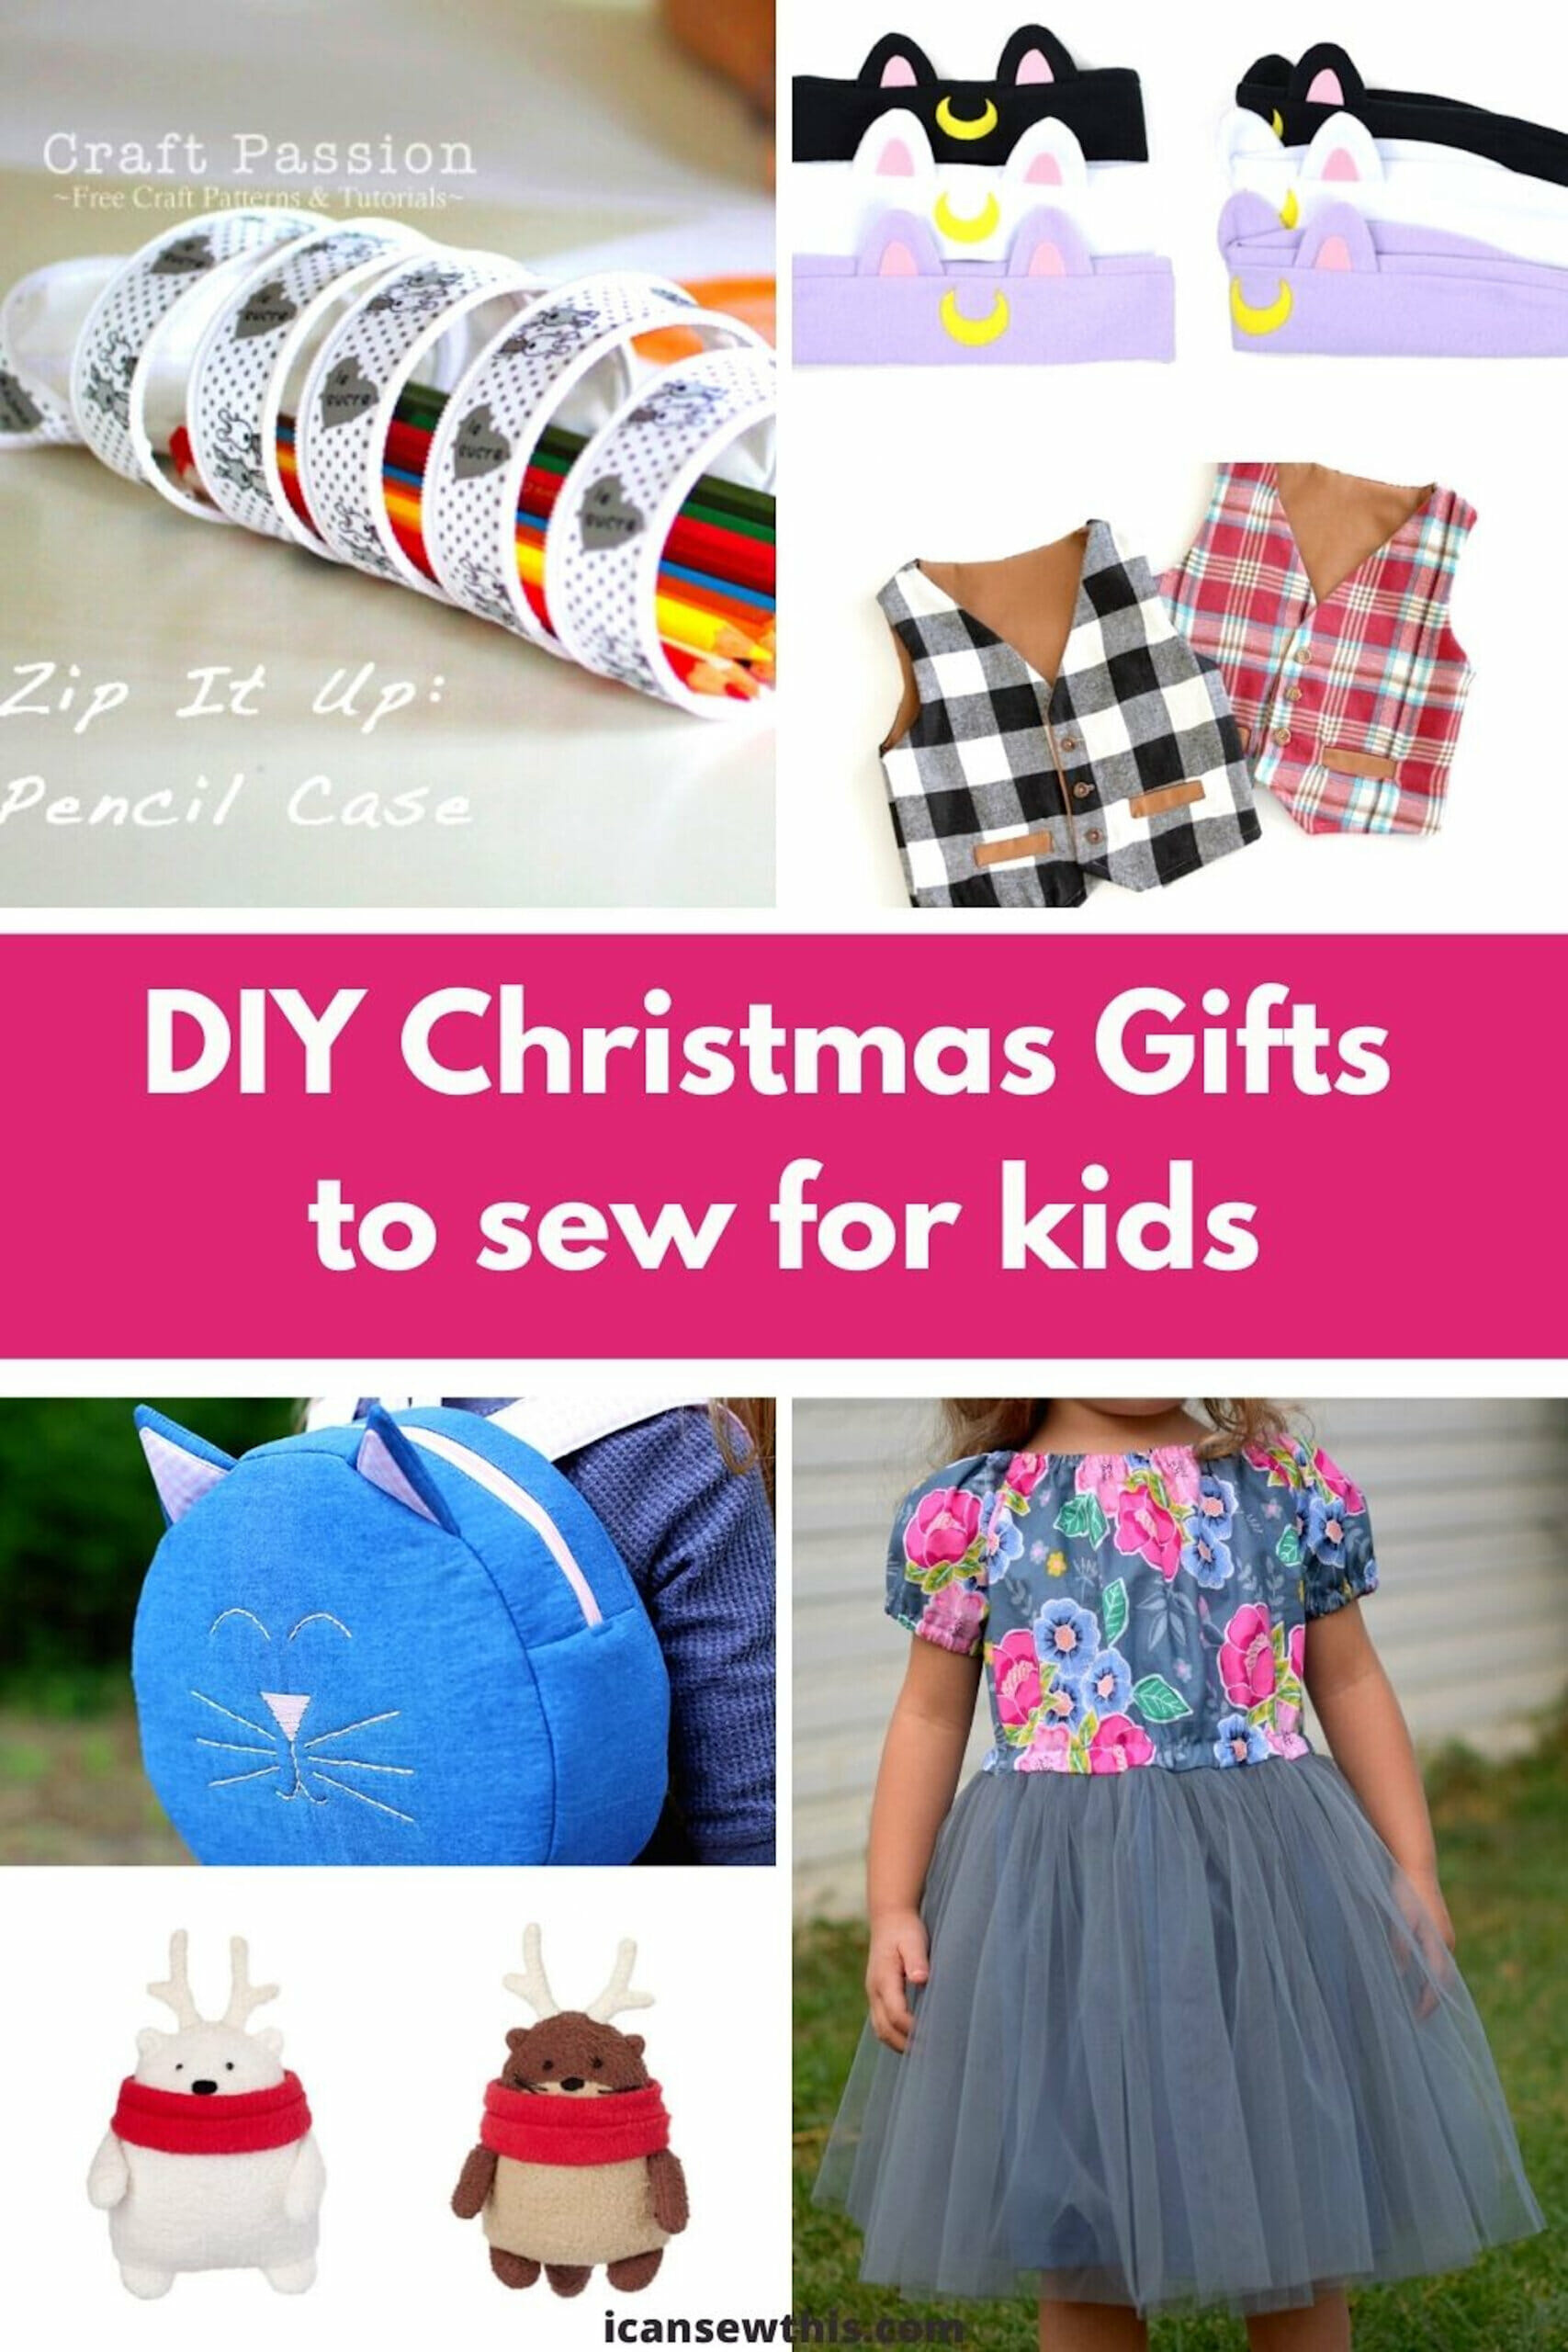 Share more than 124 sewing craft ideas for gifts - kenmei.edu.vn